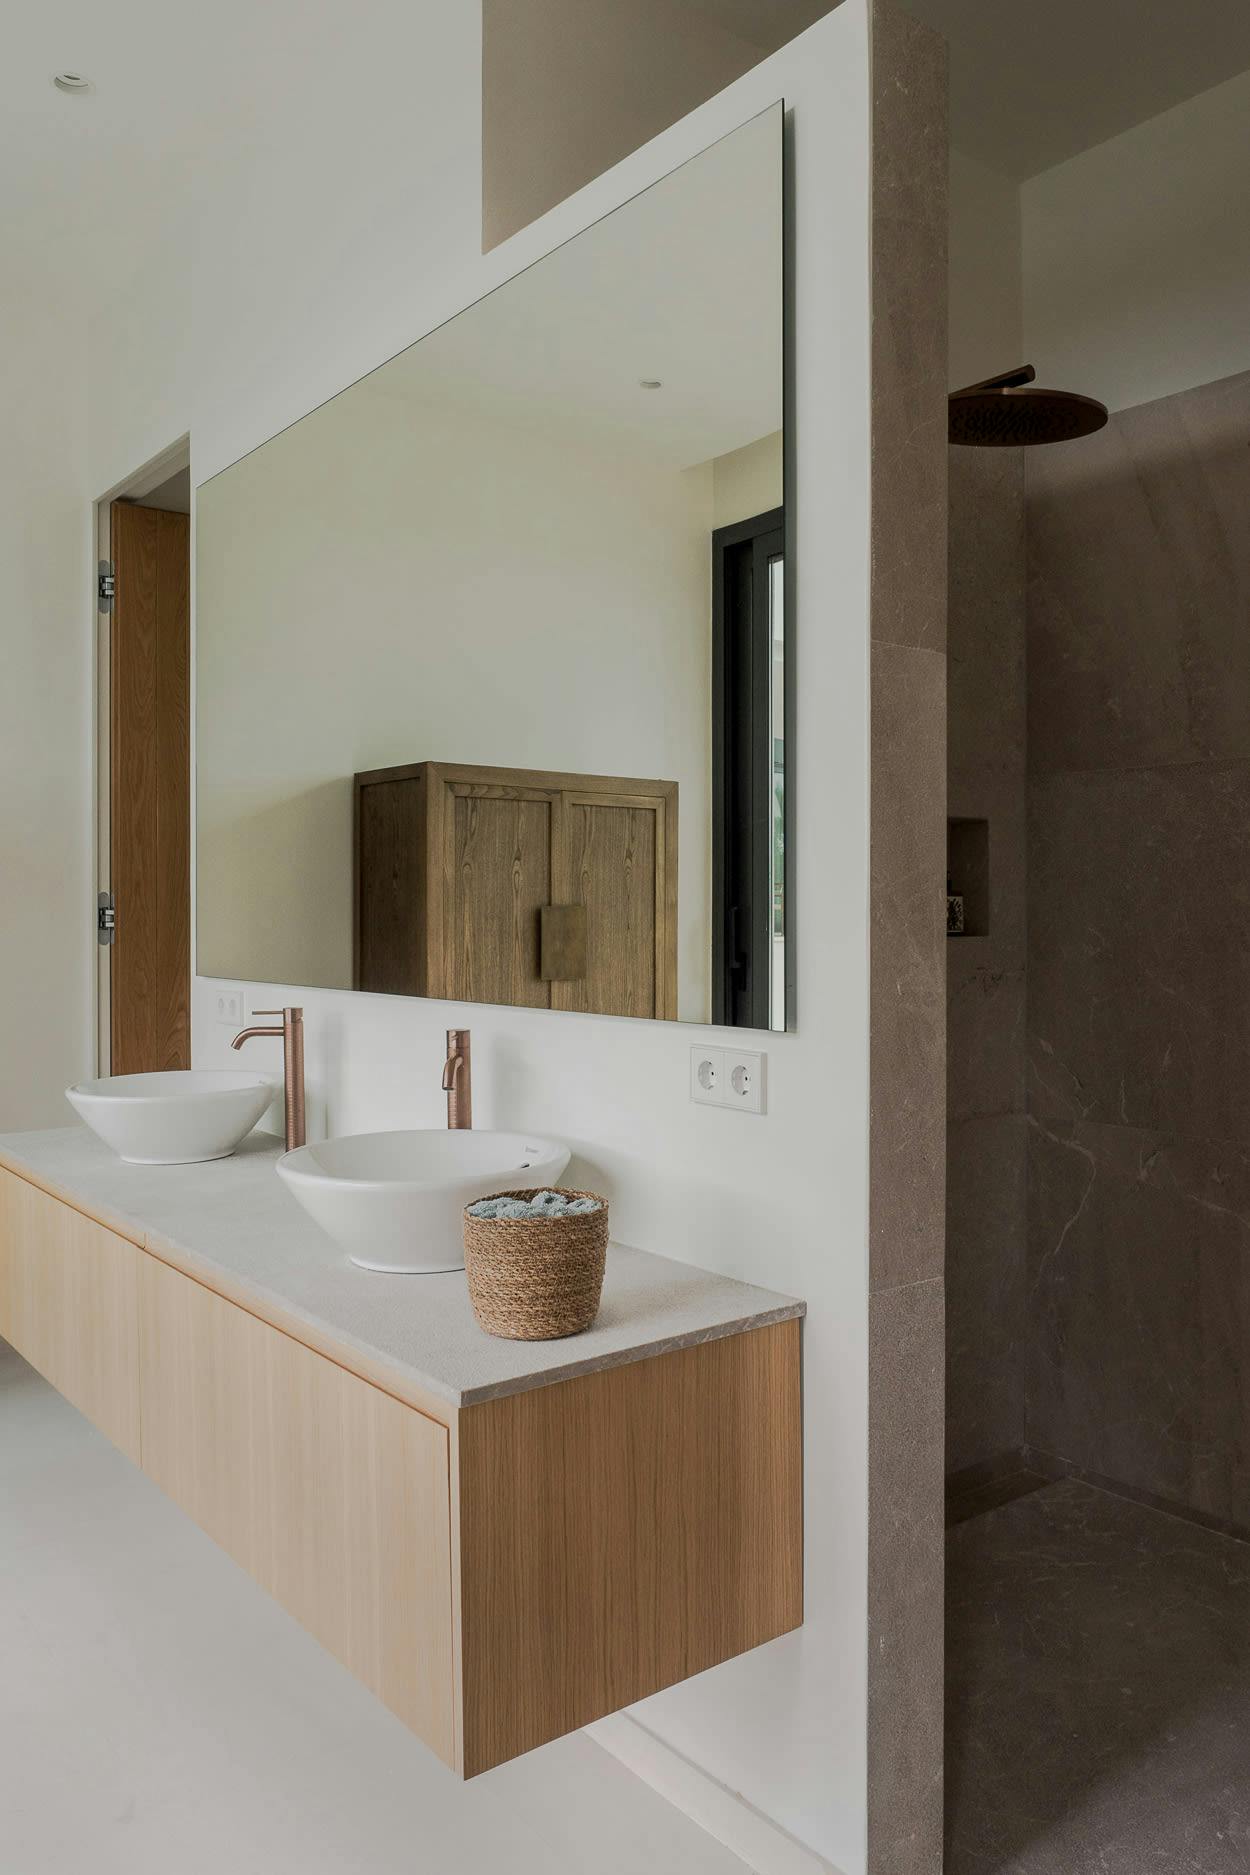 The image features a large bathroom with a double sink vanity, a mirror, a wooden cabinet, and a large mirror.